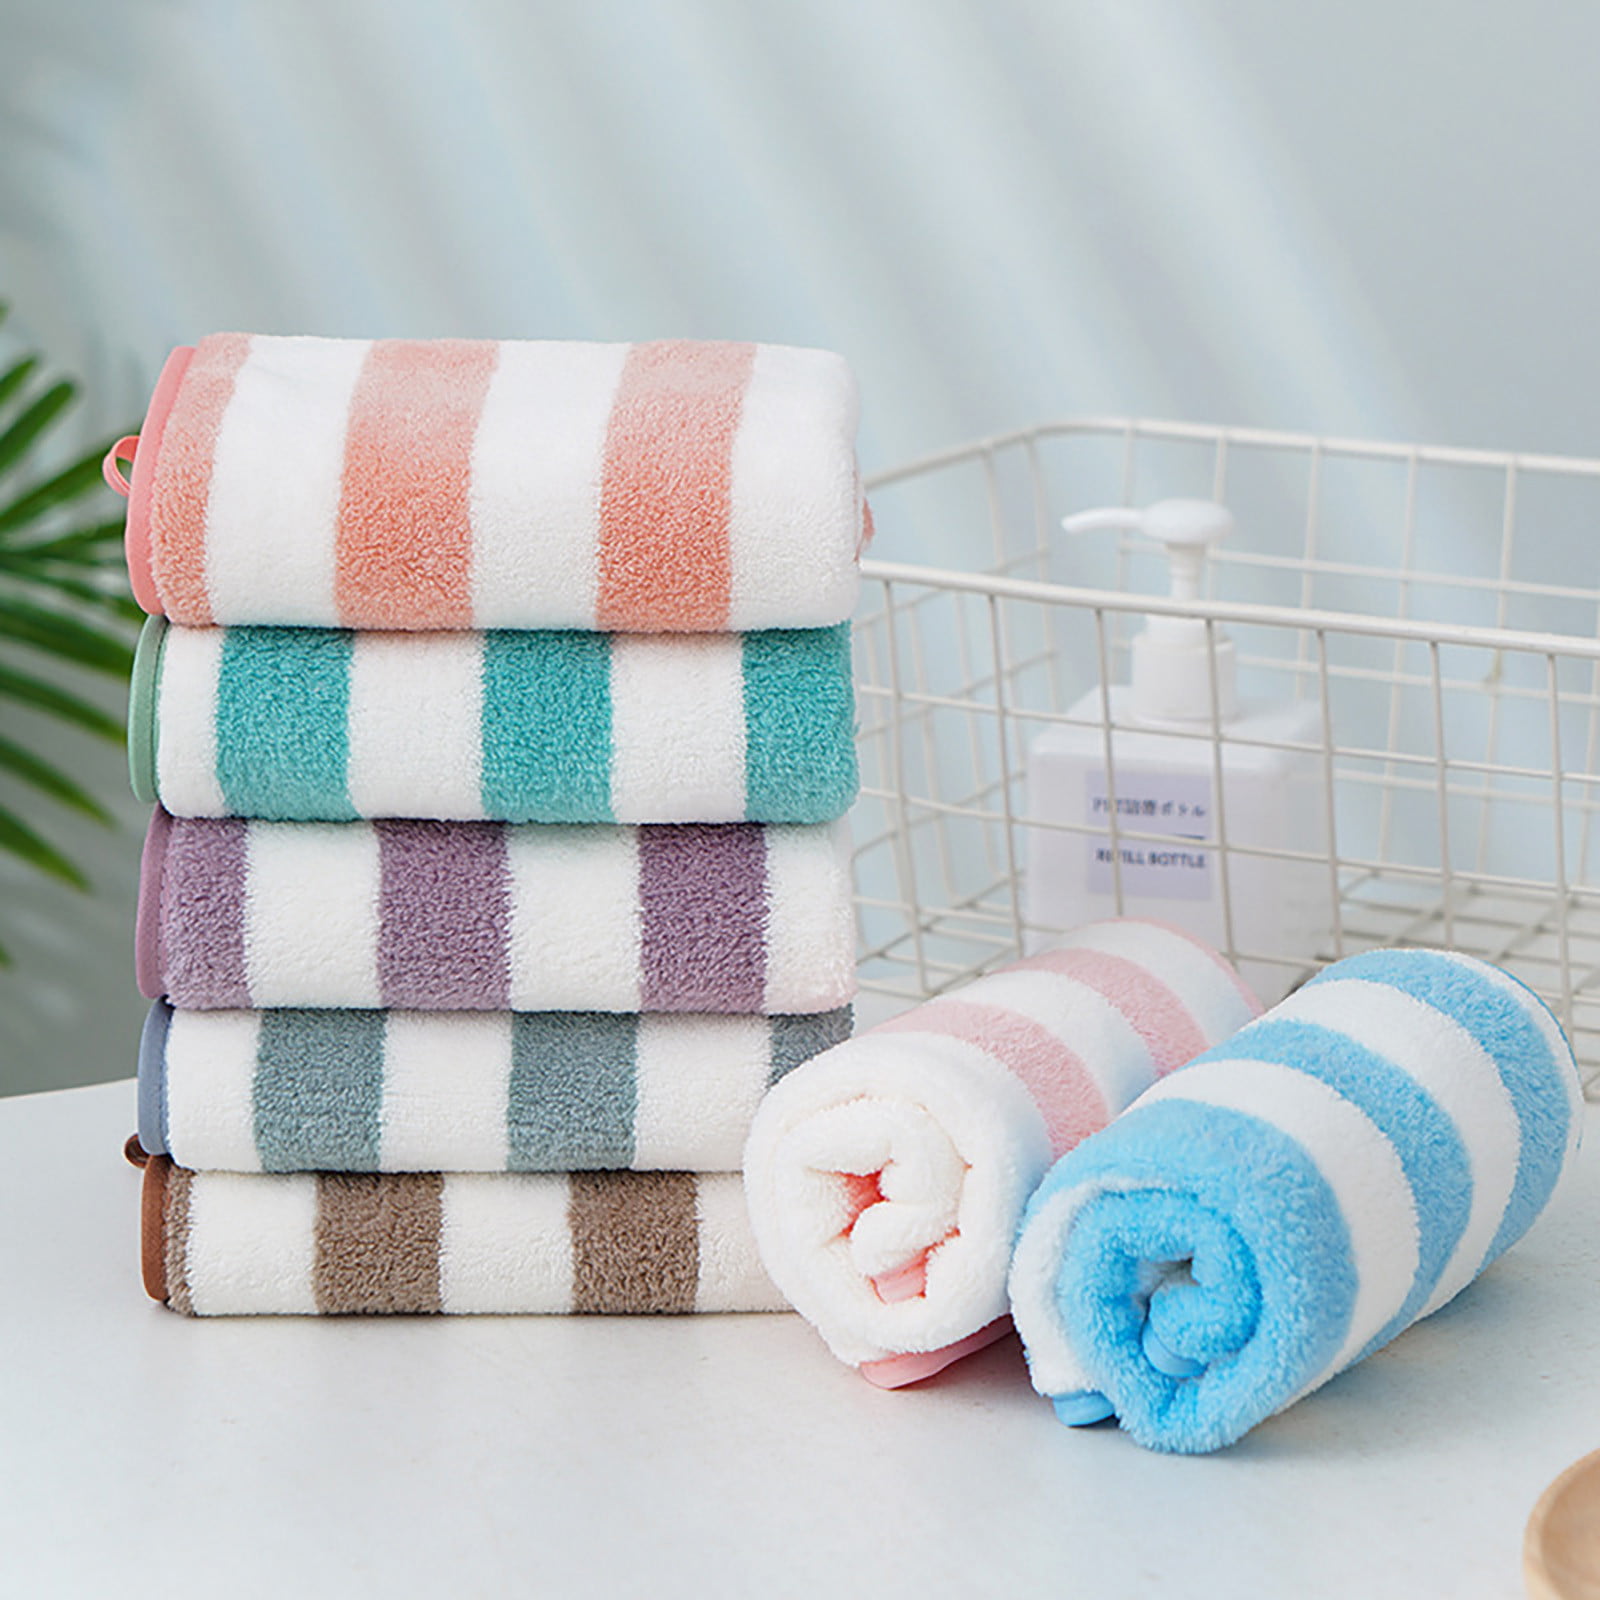  Hipruict Small Towels with Hanging Loop，Hand Dry Towels for  Kitchen & Bathroom, Super Absorbent Soft Small Hanging Towel Set with Hanging  Loop, Machine Washable Towel Fast Drying, Set of 5 